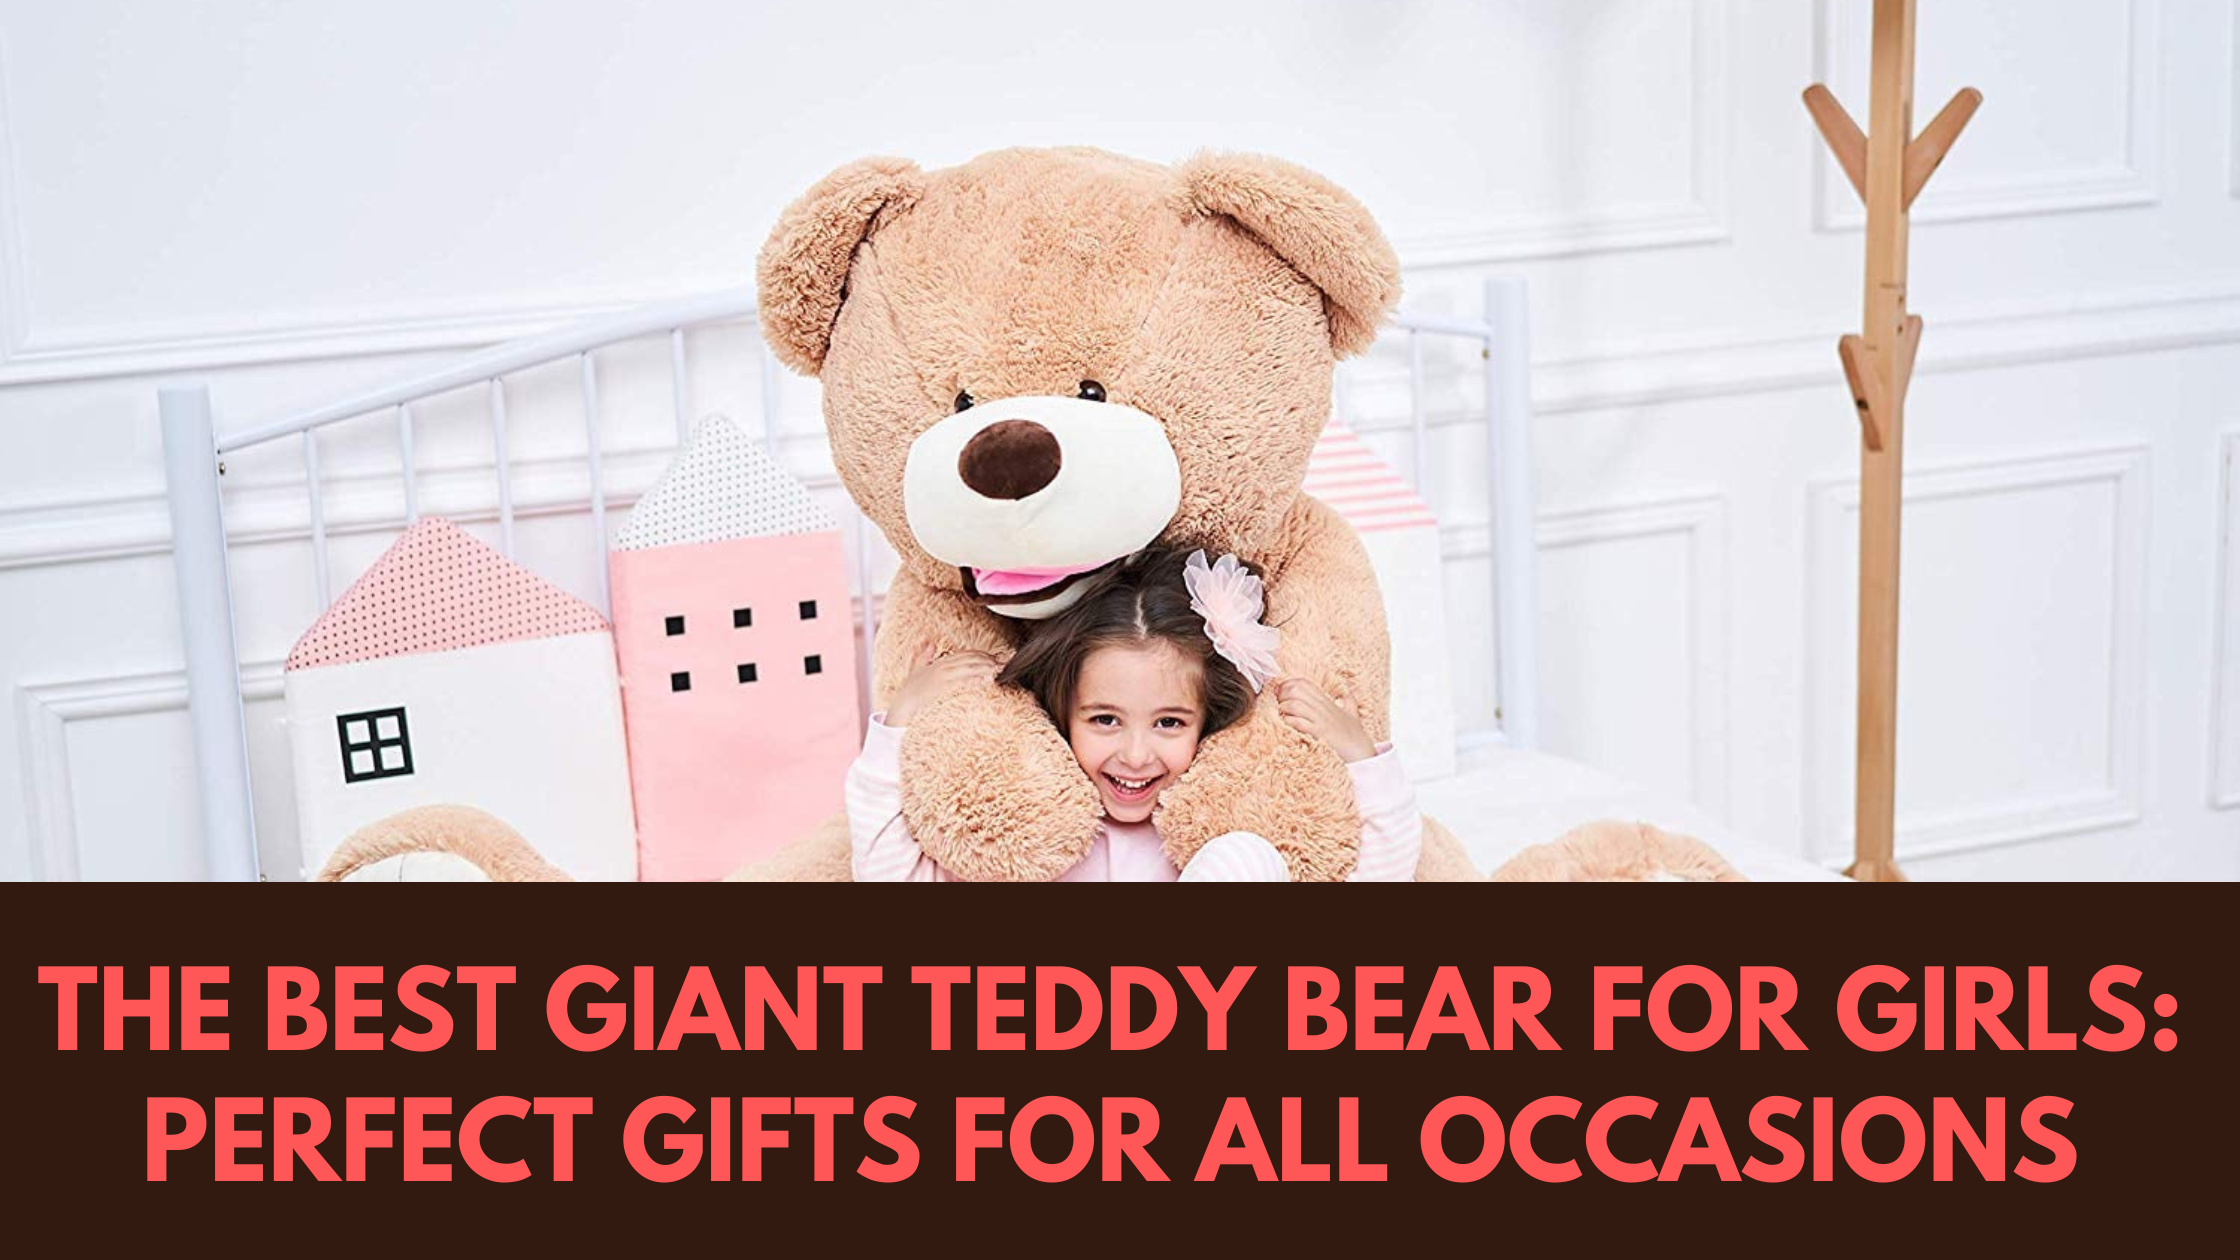 Best Giant Teddy Bear for Girls: Perfect Gifts for All Occasions